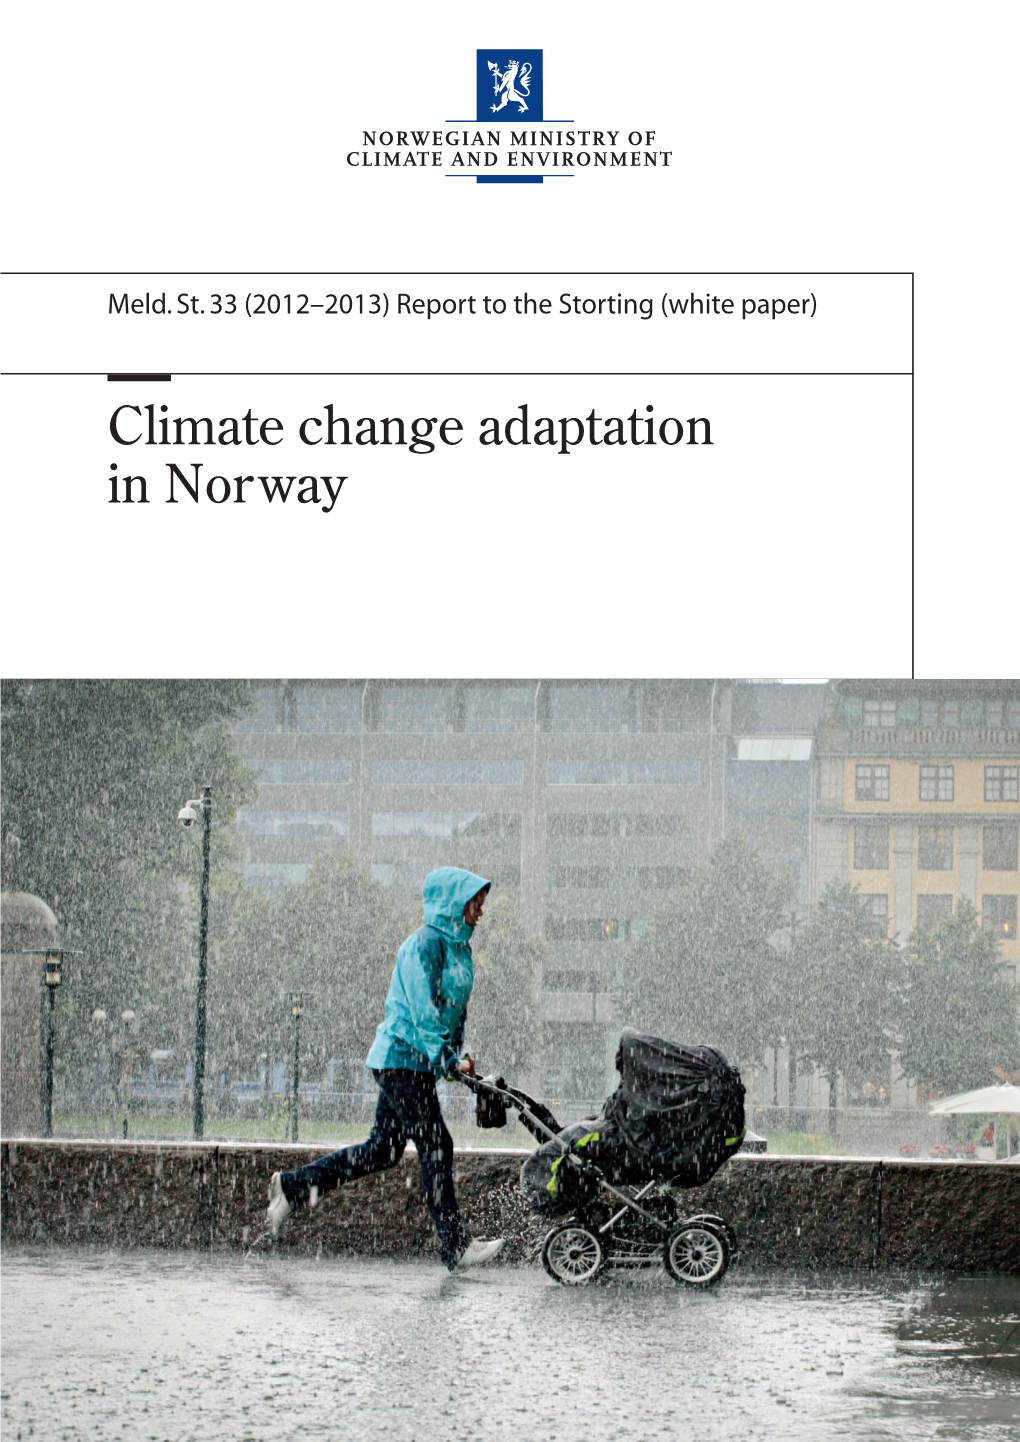 (White Paper) to the Storting 33 (2012–2013) Report Meld